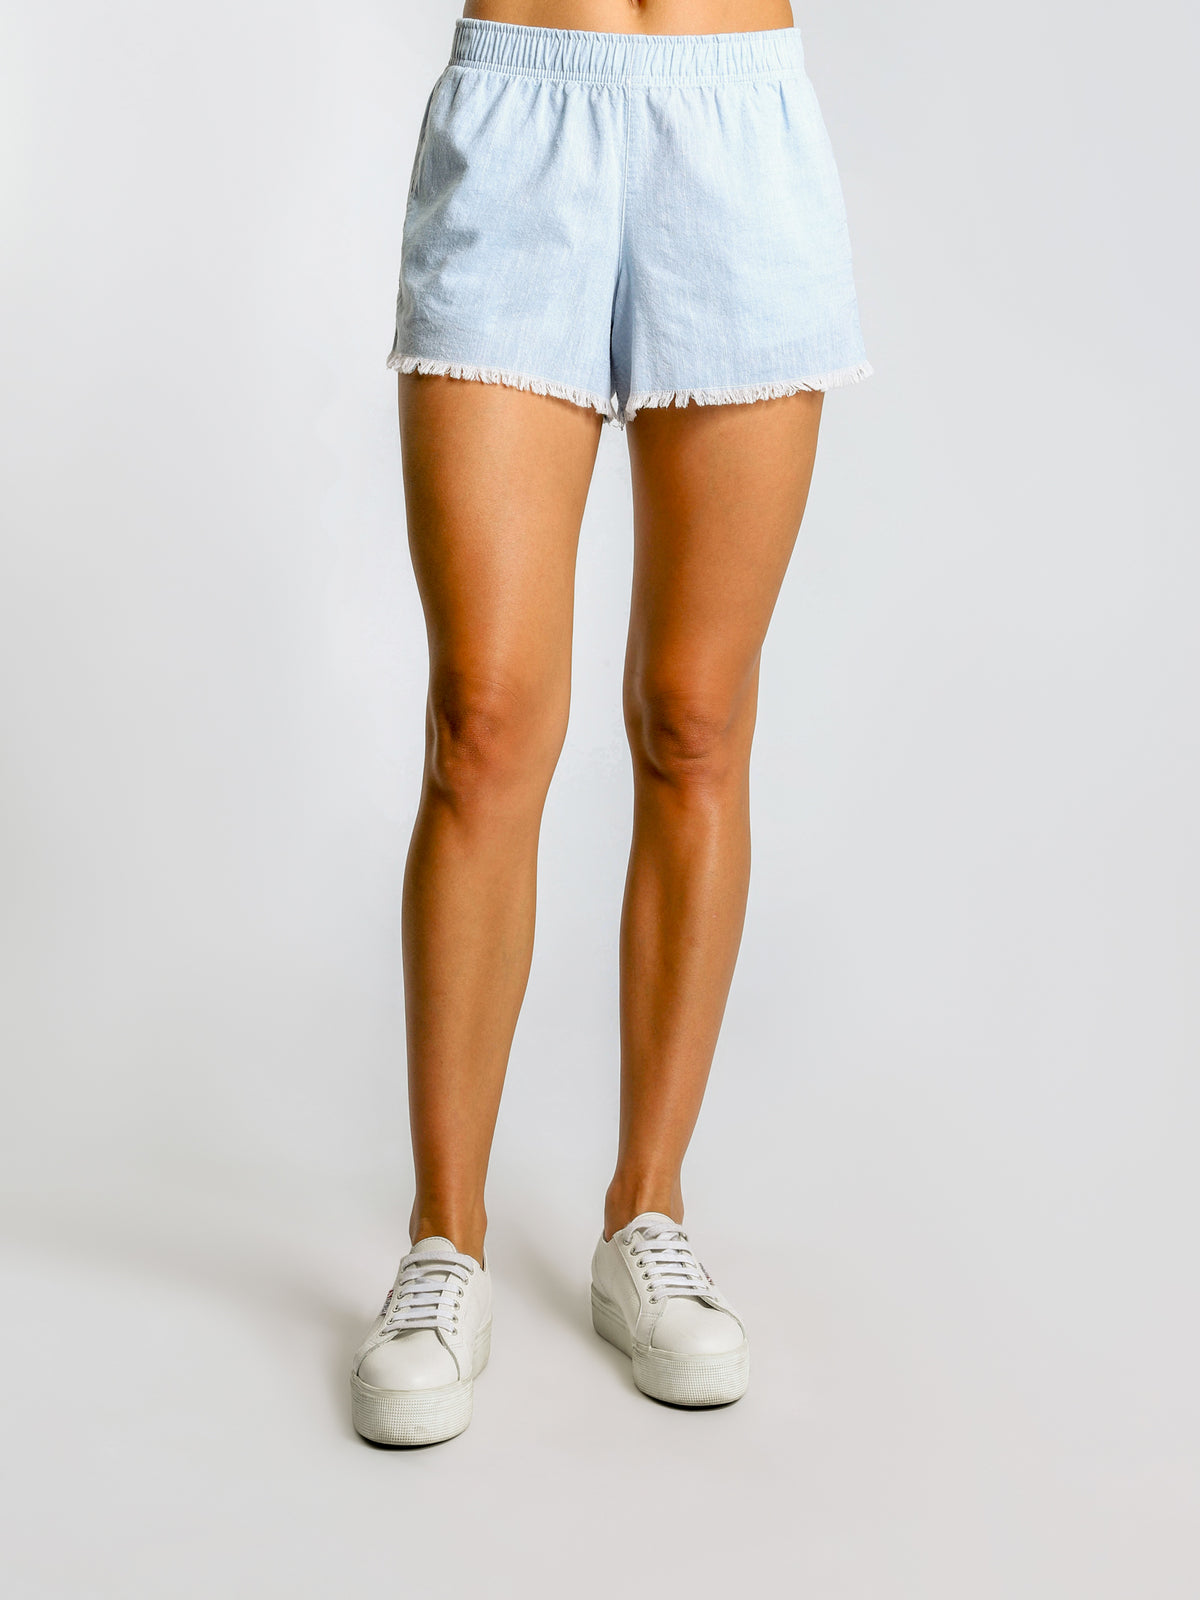 Bedford Chambray Shorts in Sky Blue